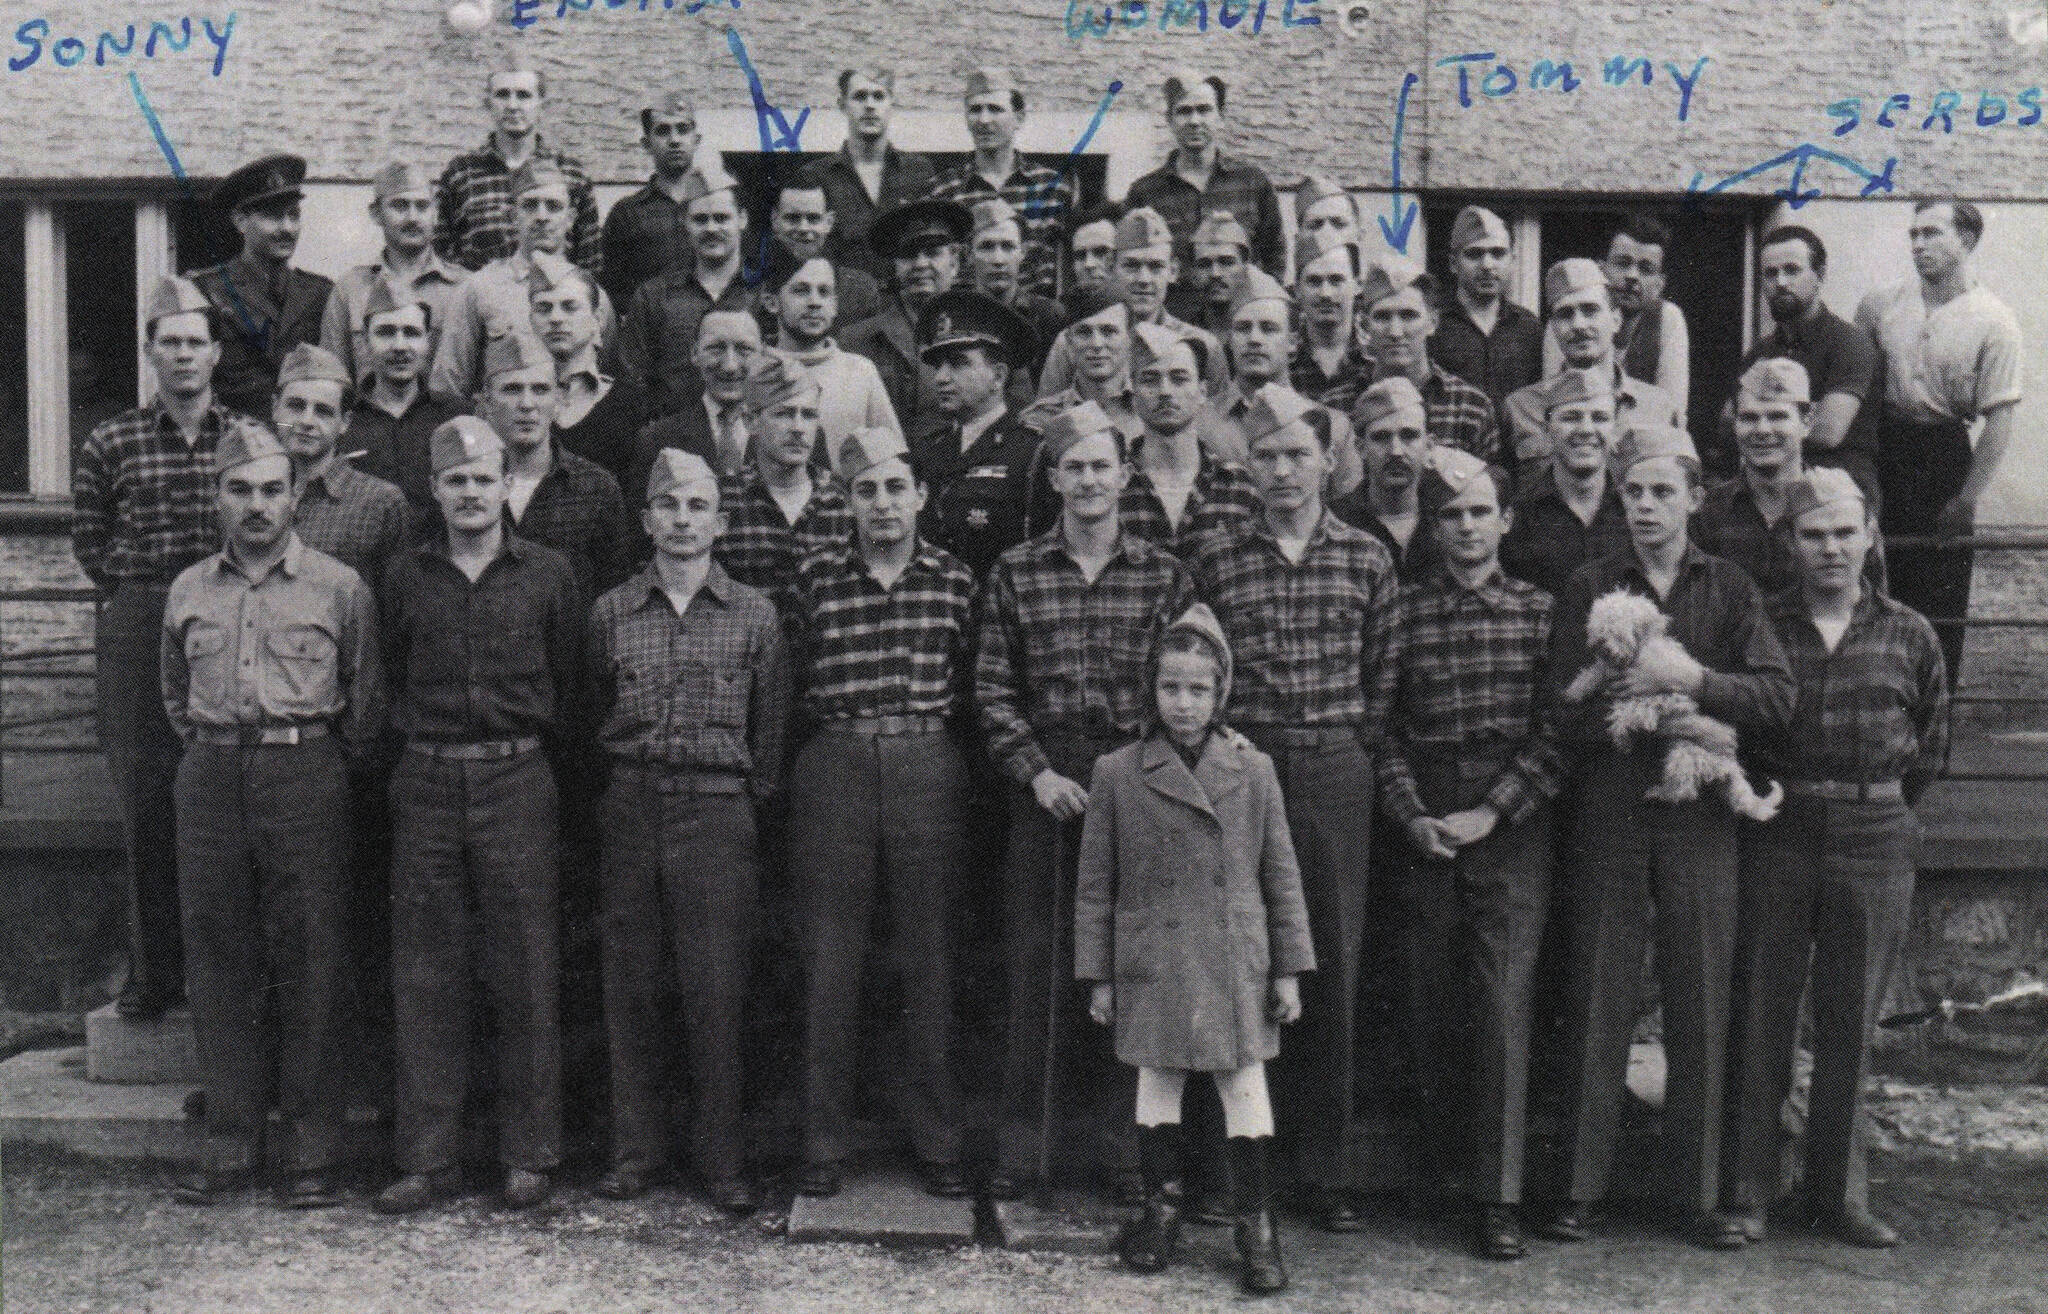 [m2b—] This group of prisoners of war in Romania in 1943-44 included Second Lieutenant Lawrence H. Lancashire (labeled “Sonny” here at left). Lancashire was released after more than a year in captivity. (Photo courtesy of the Lancashire Family Collection)